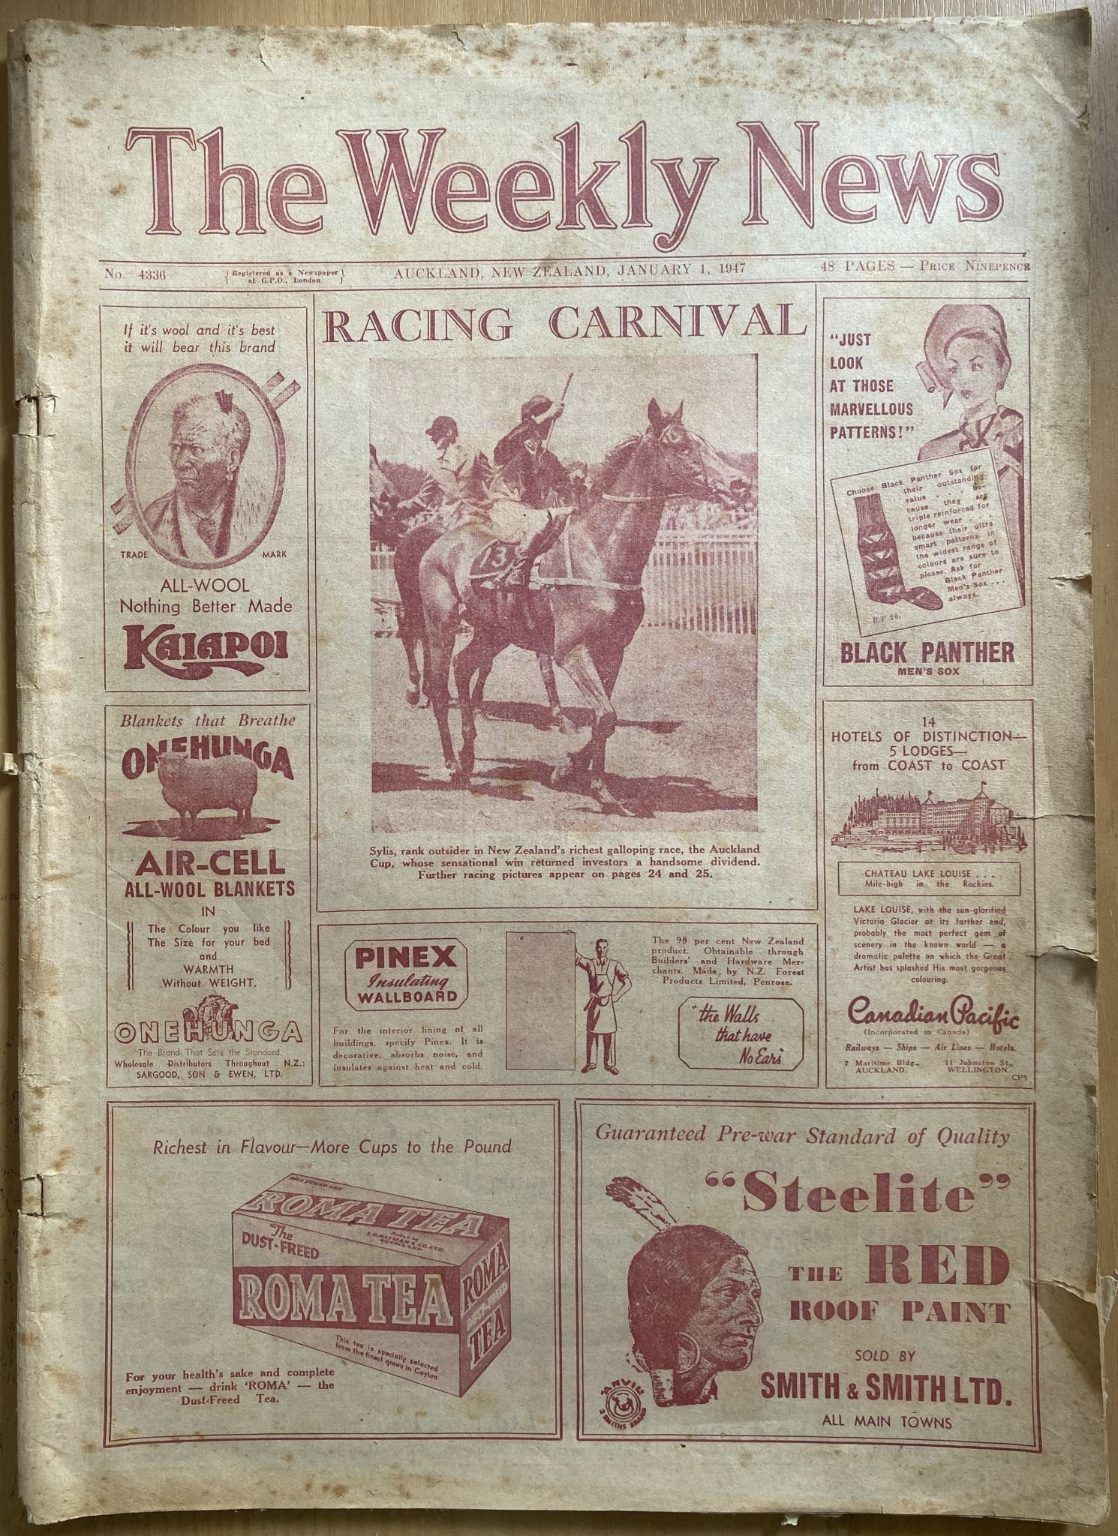 OLD NEWSPAPER: The Weekly News - No. 4336, 1 January 1947